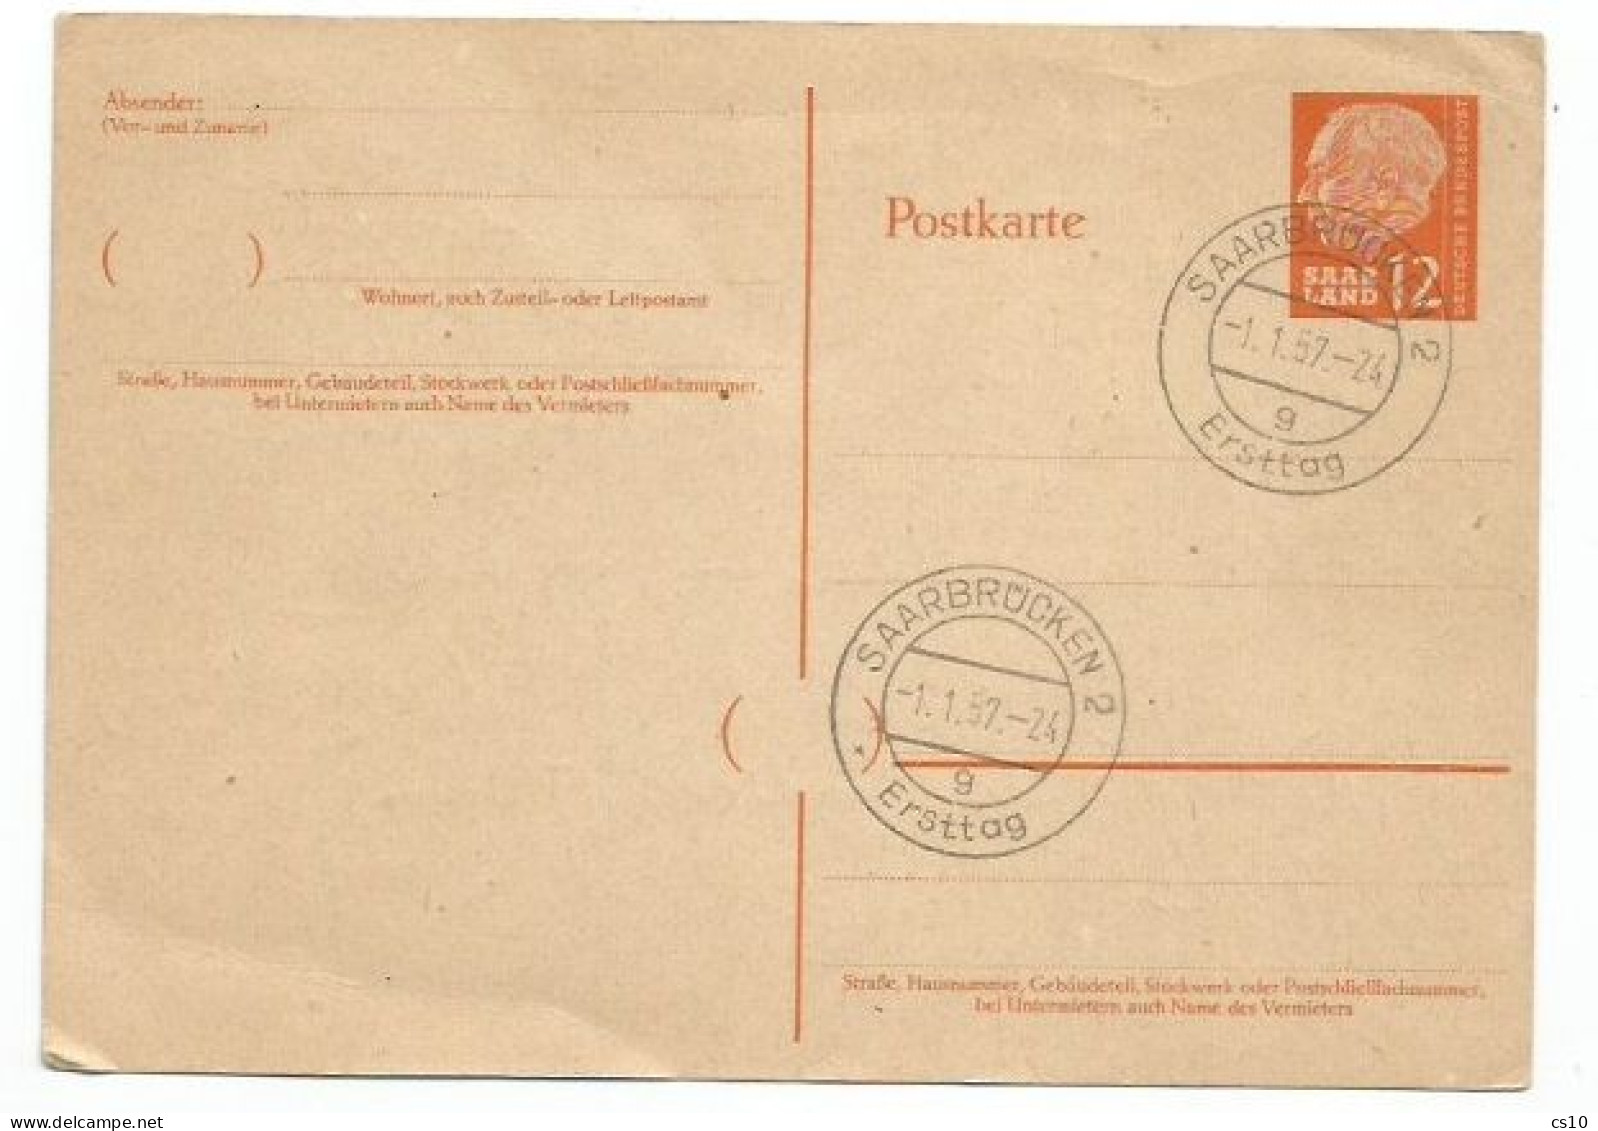 SaarLand PSC Card  President Heuss 12F With PMK Erstag 1jan1957 "Back To Germany" Day - Lettres & Documents